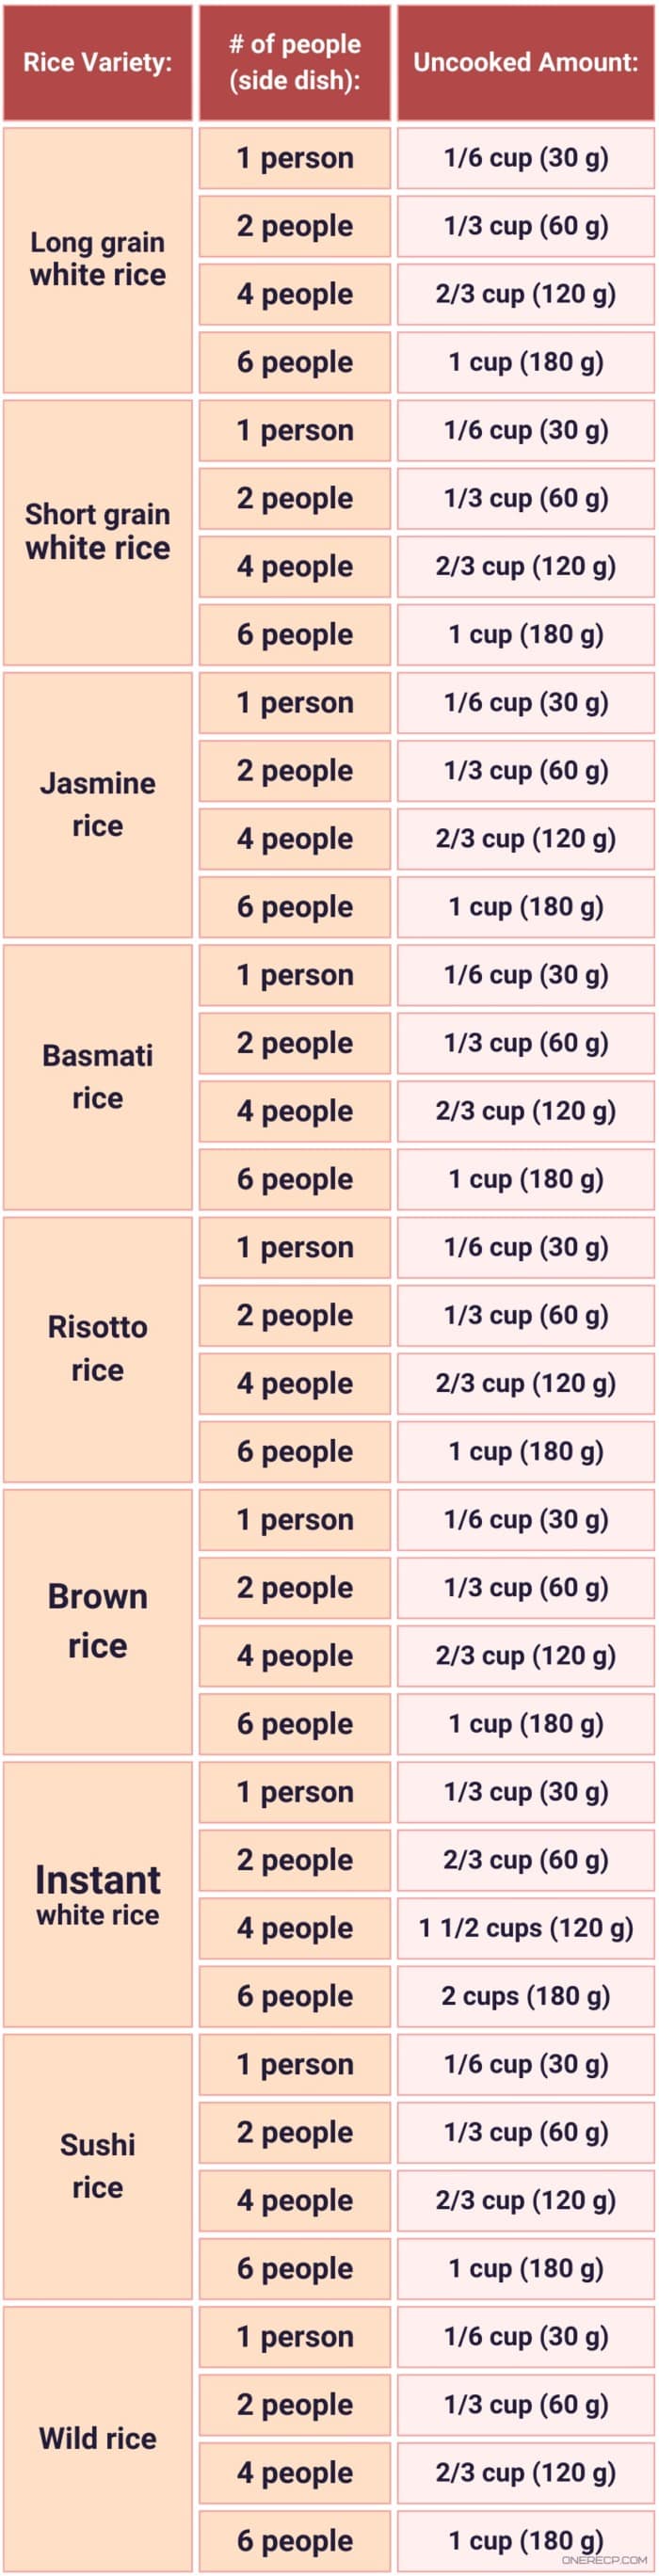 a table showing how much uncooked rice to cook per person as a side dish